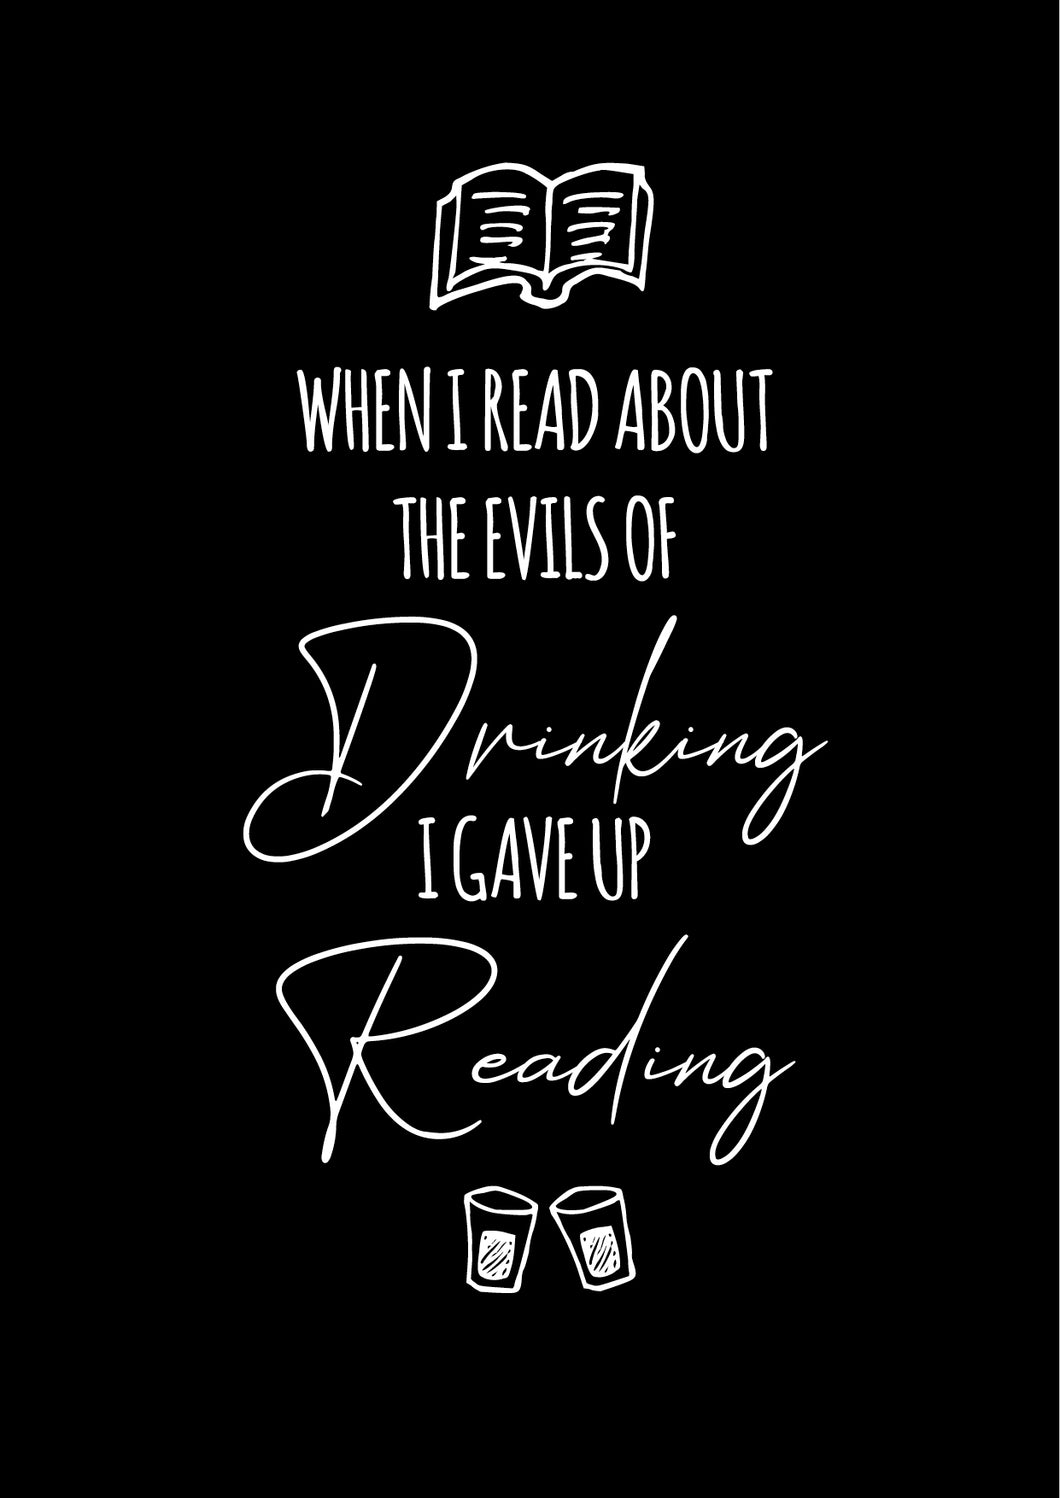 When I read about the evils of drinking I gave up Reading. A4 Black and White Prints